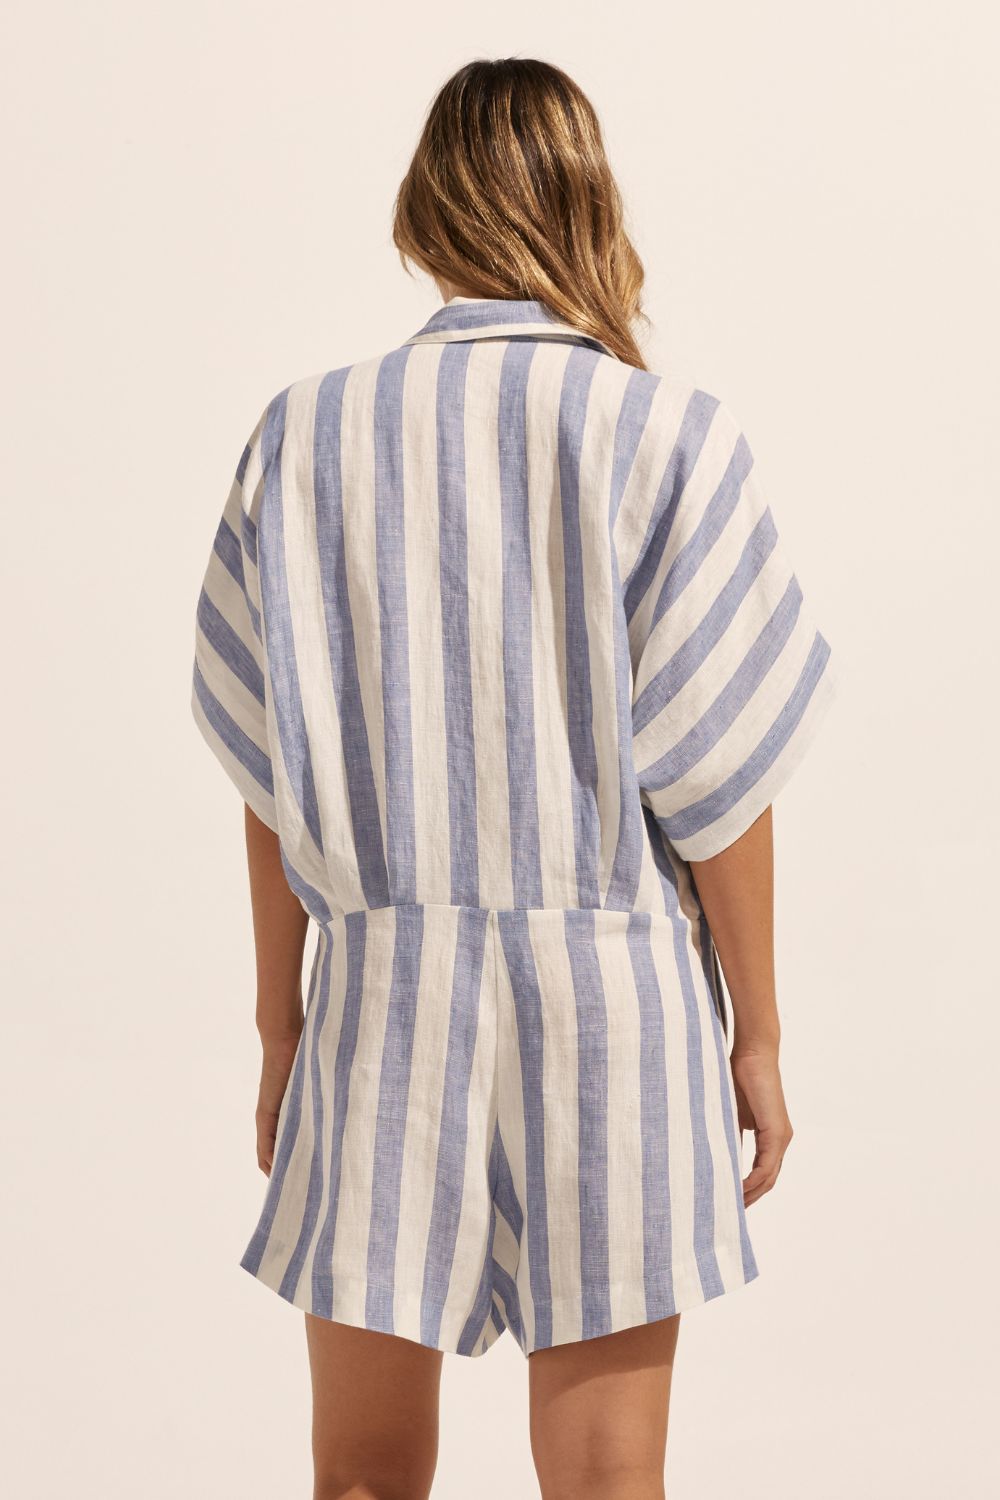 blue and white stripe, jumpsuit, button down collar, oversized patch pockets, back view